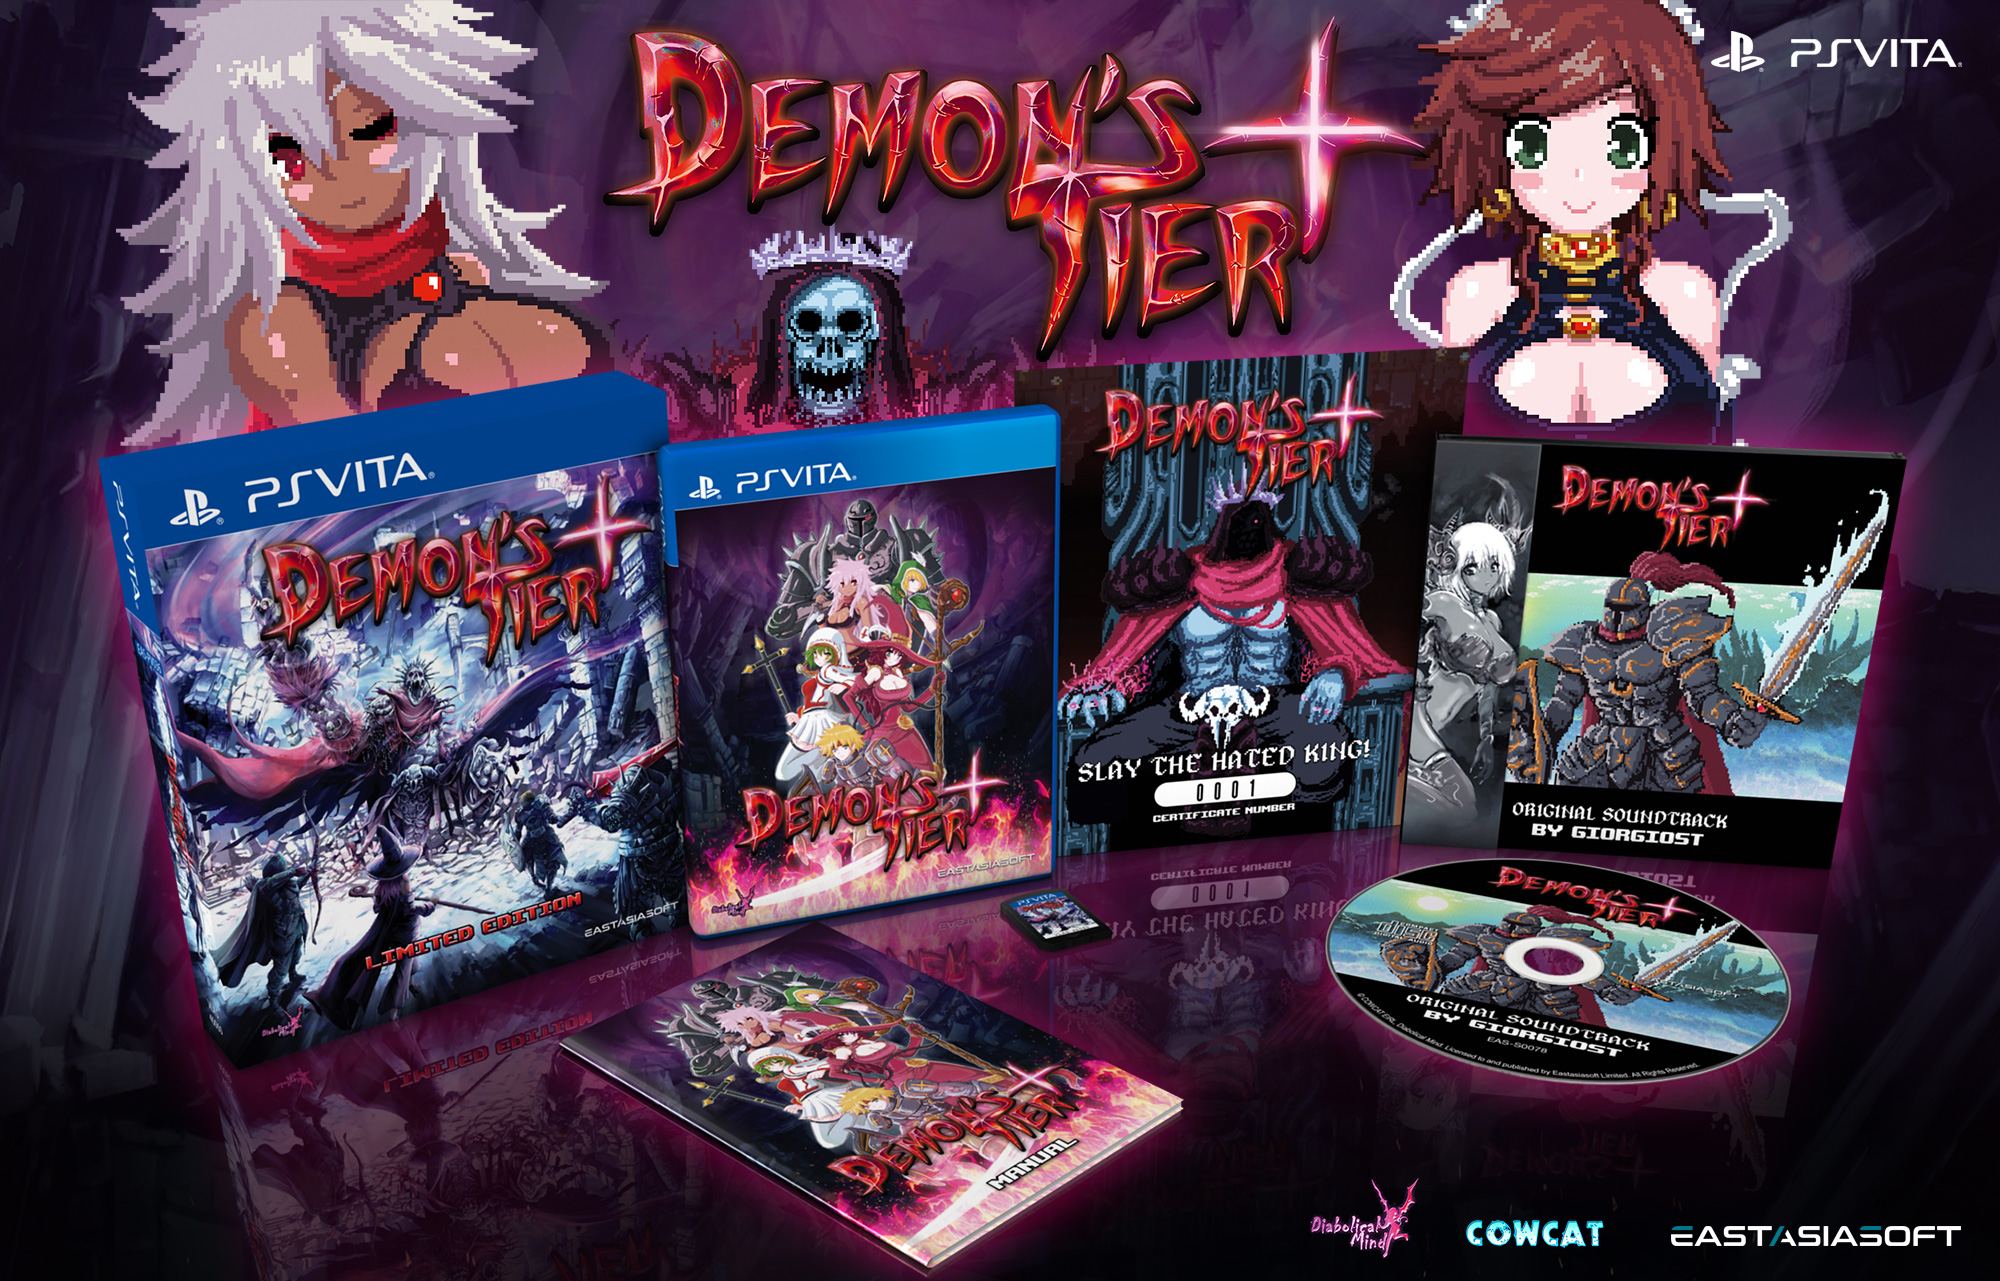 Demon's Tier+ [Limited Edition] PLAY EXCLUSIVES for PlayStation Vita